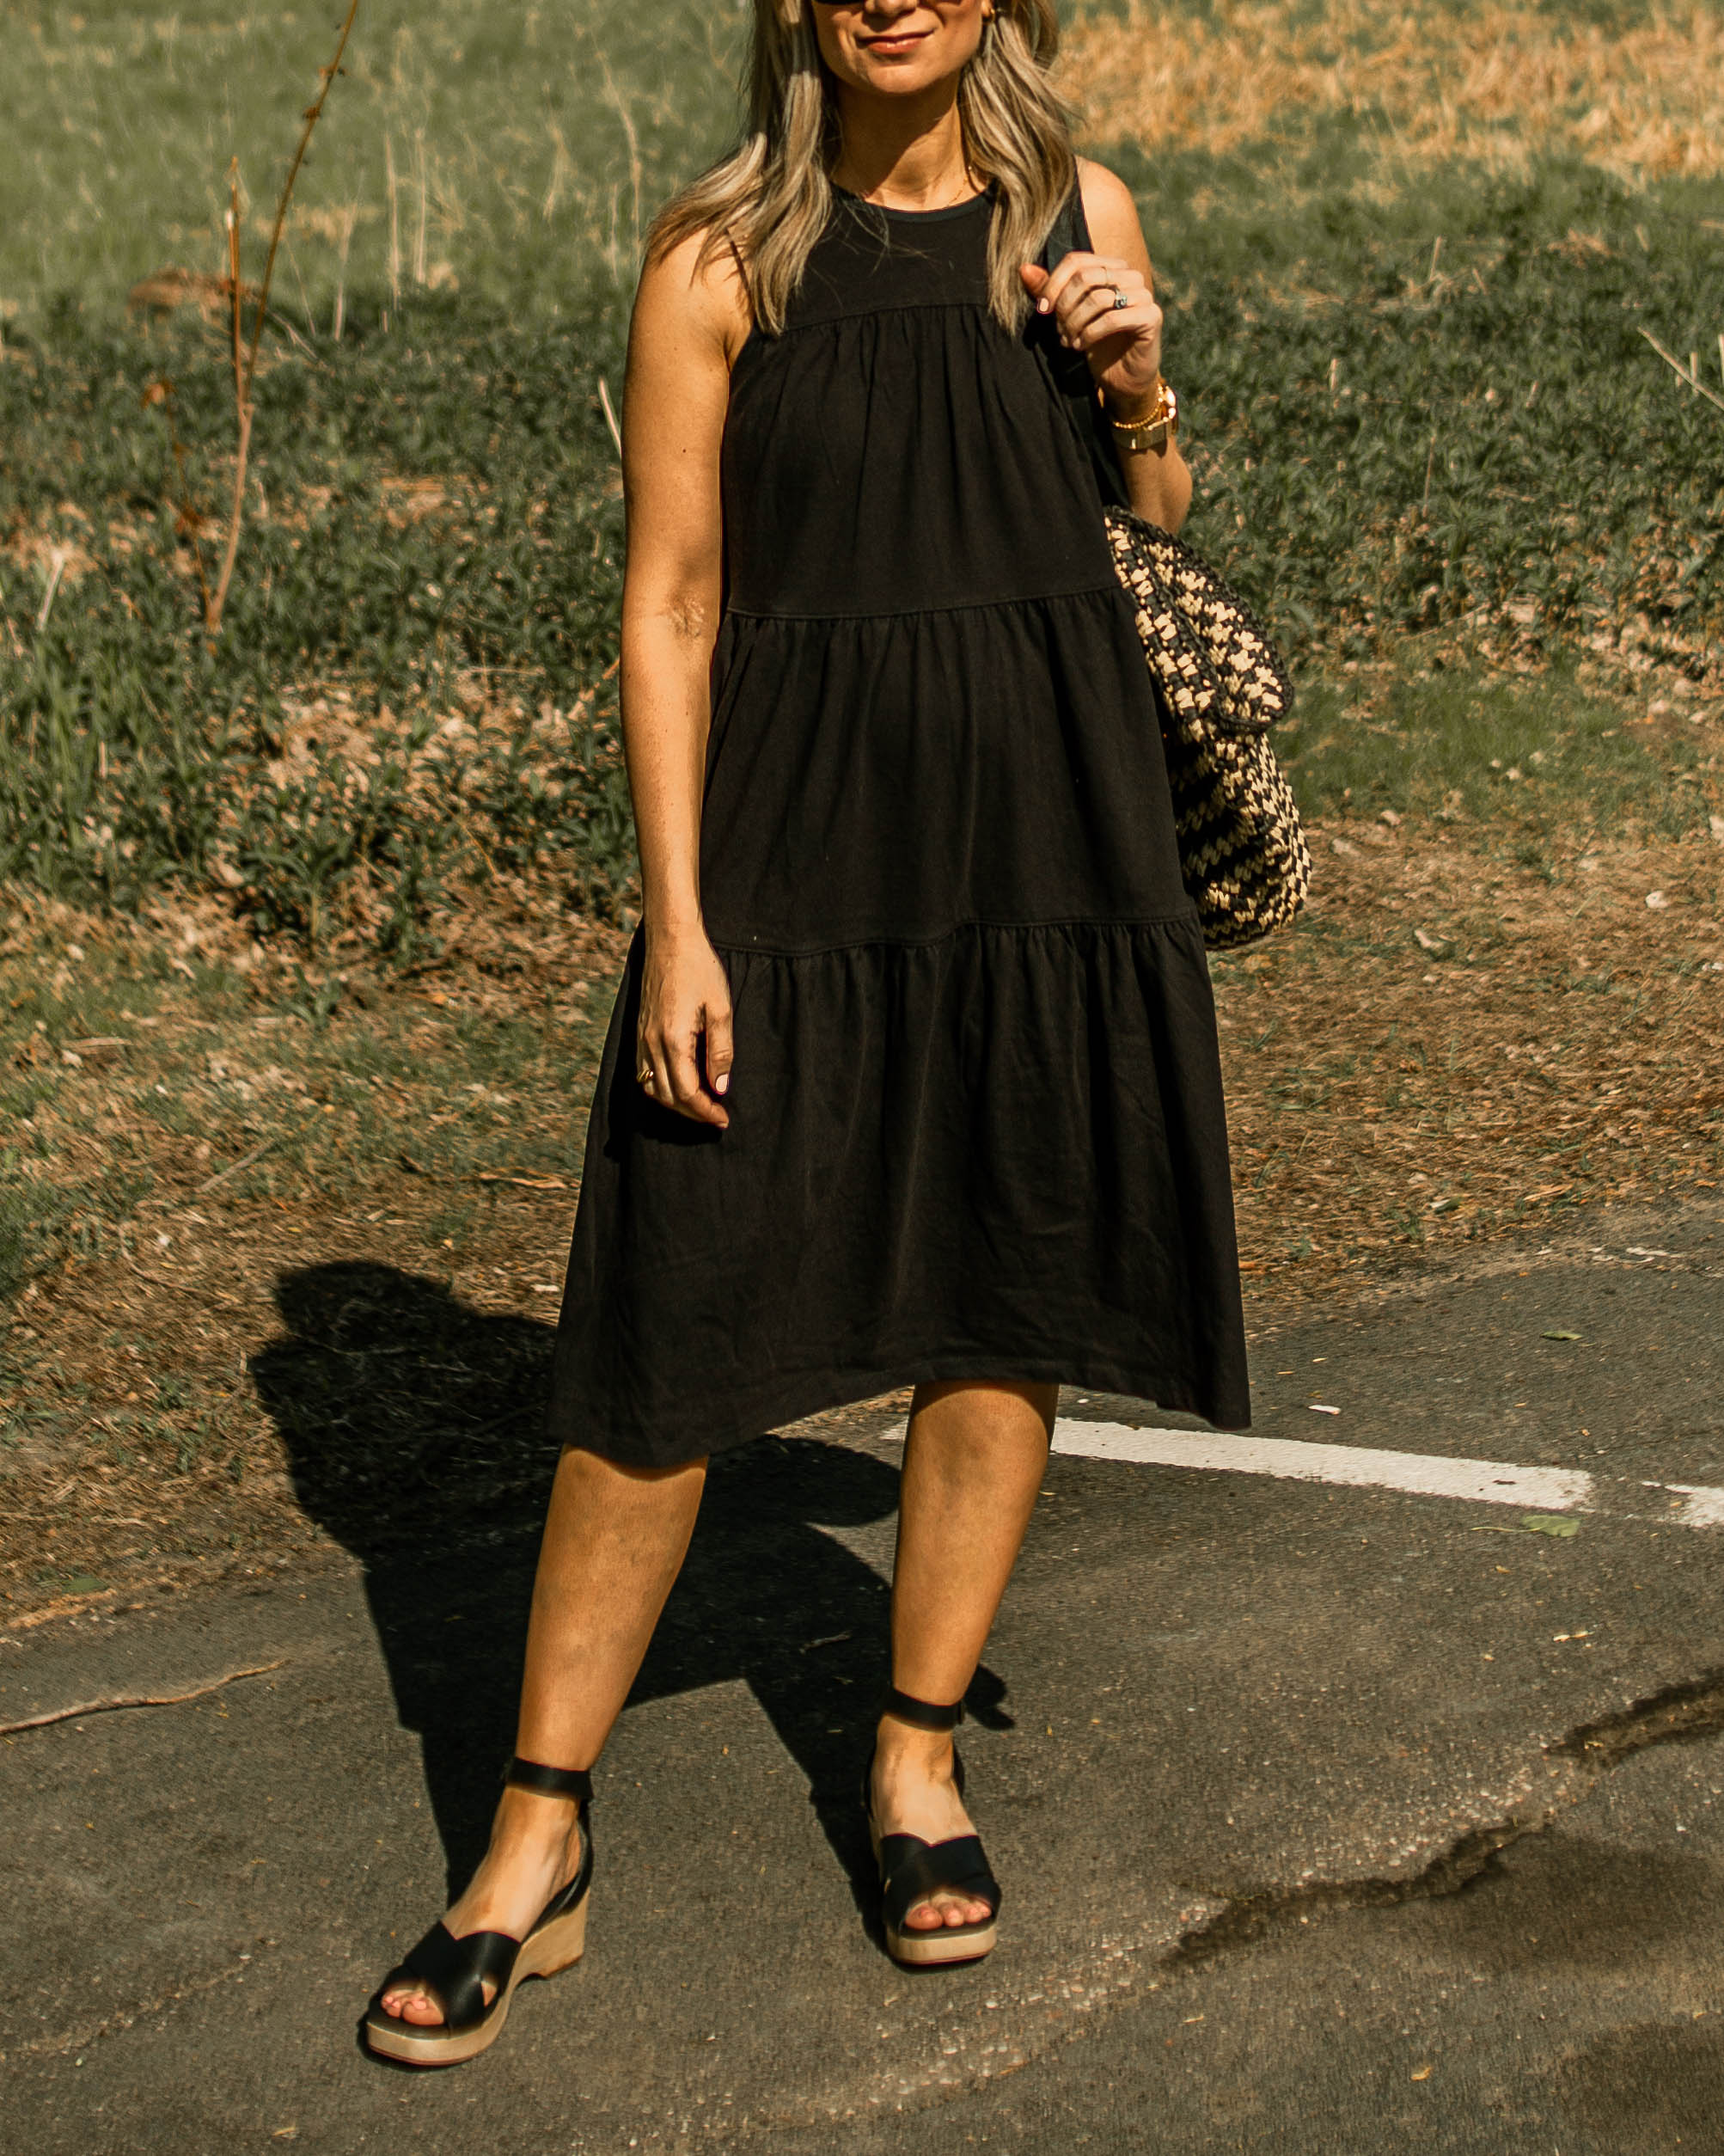 The Tiered Sun Dress: An Easy 